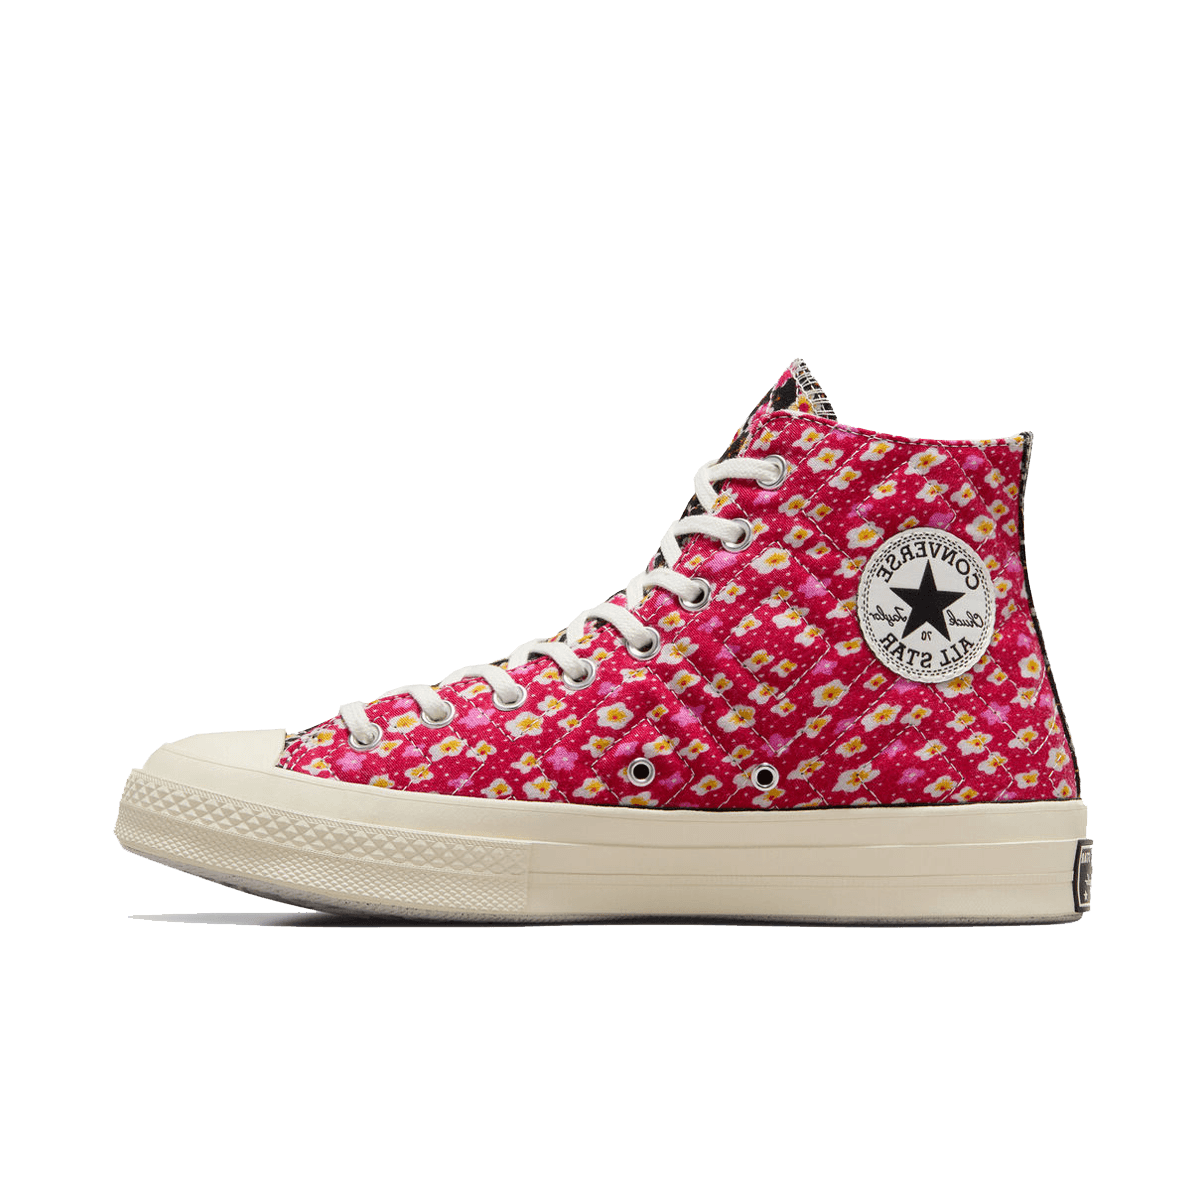 Converse Chuck 70 Hi Upcycled 'Floral' A04617C